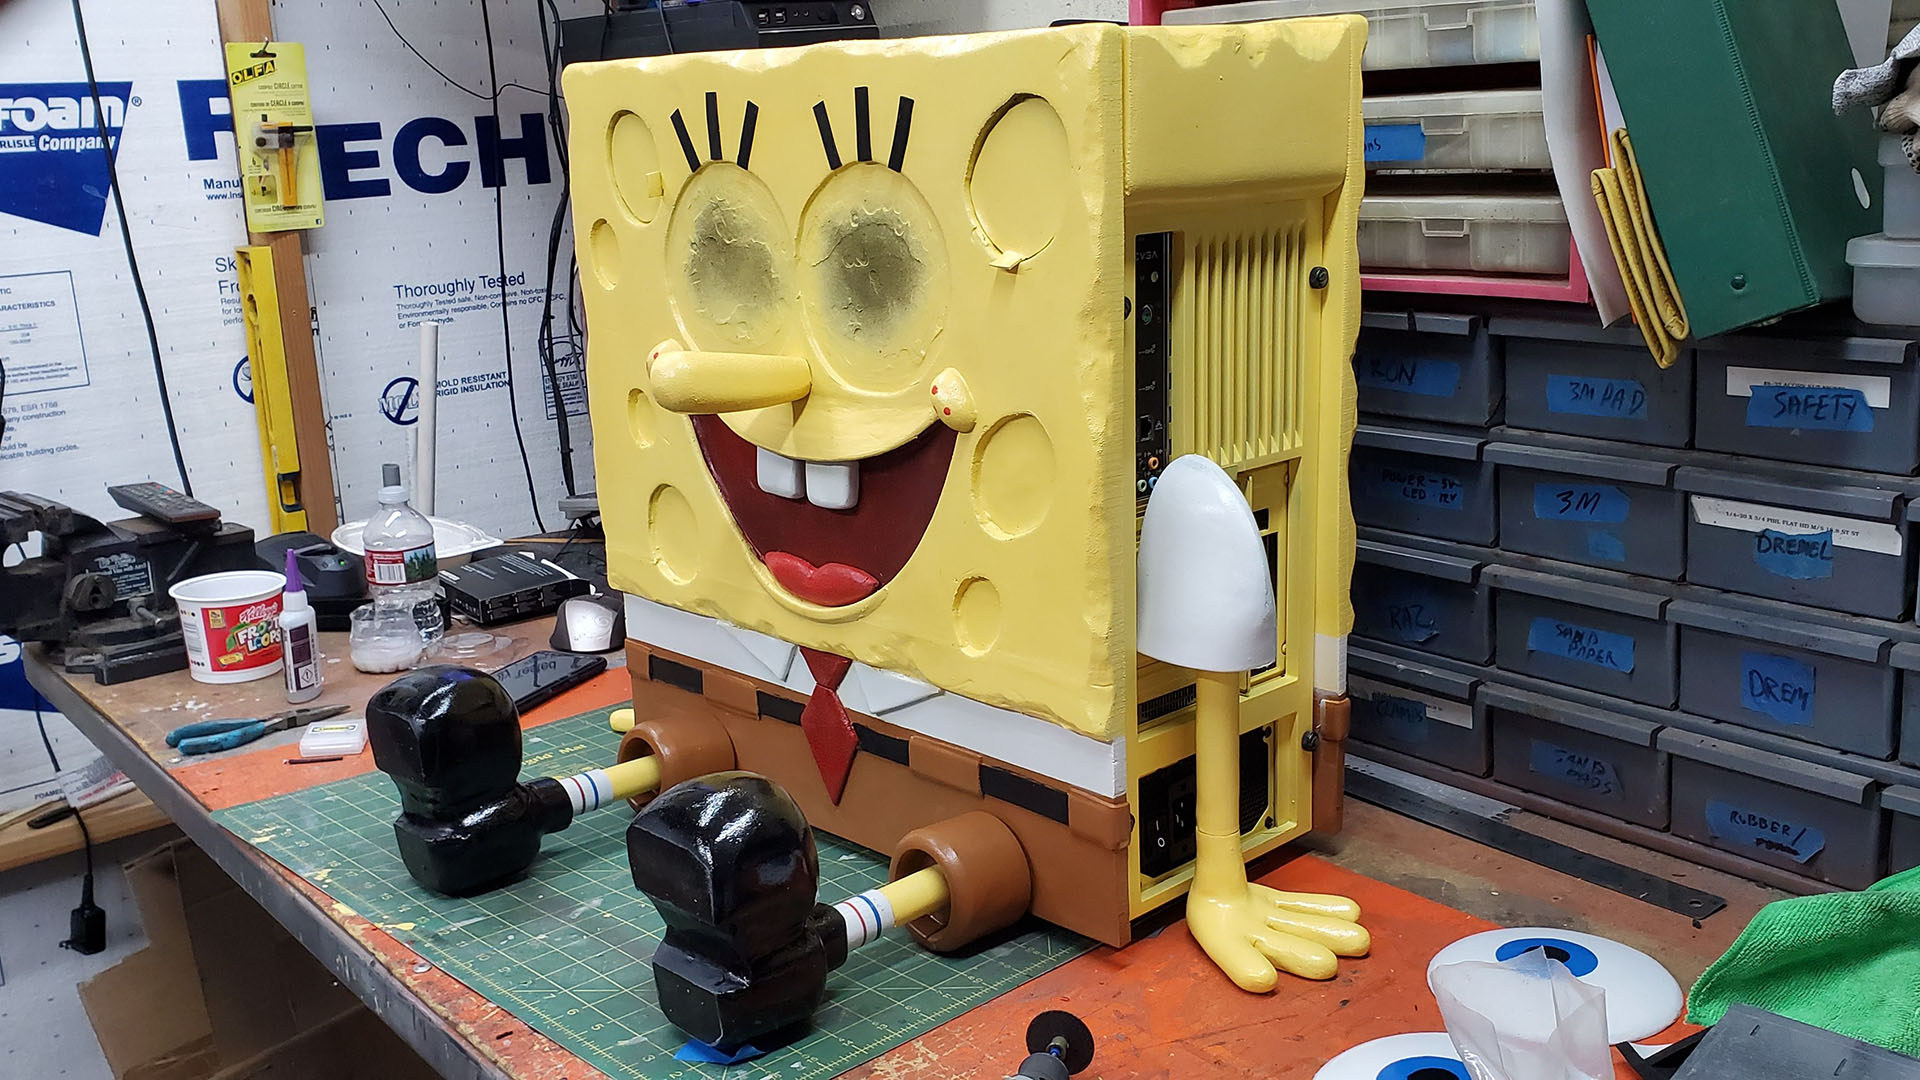 A spongebob squarepants without any eyes modelled into a gaming PC